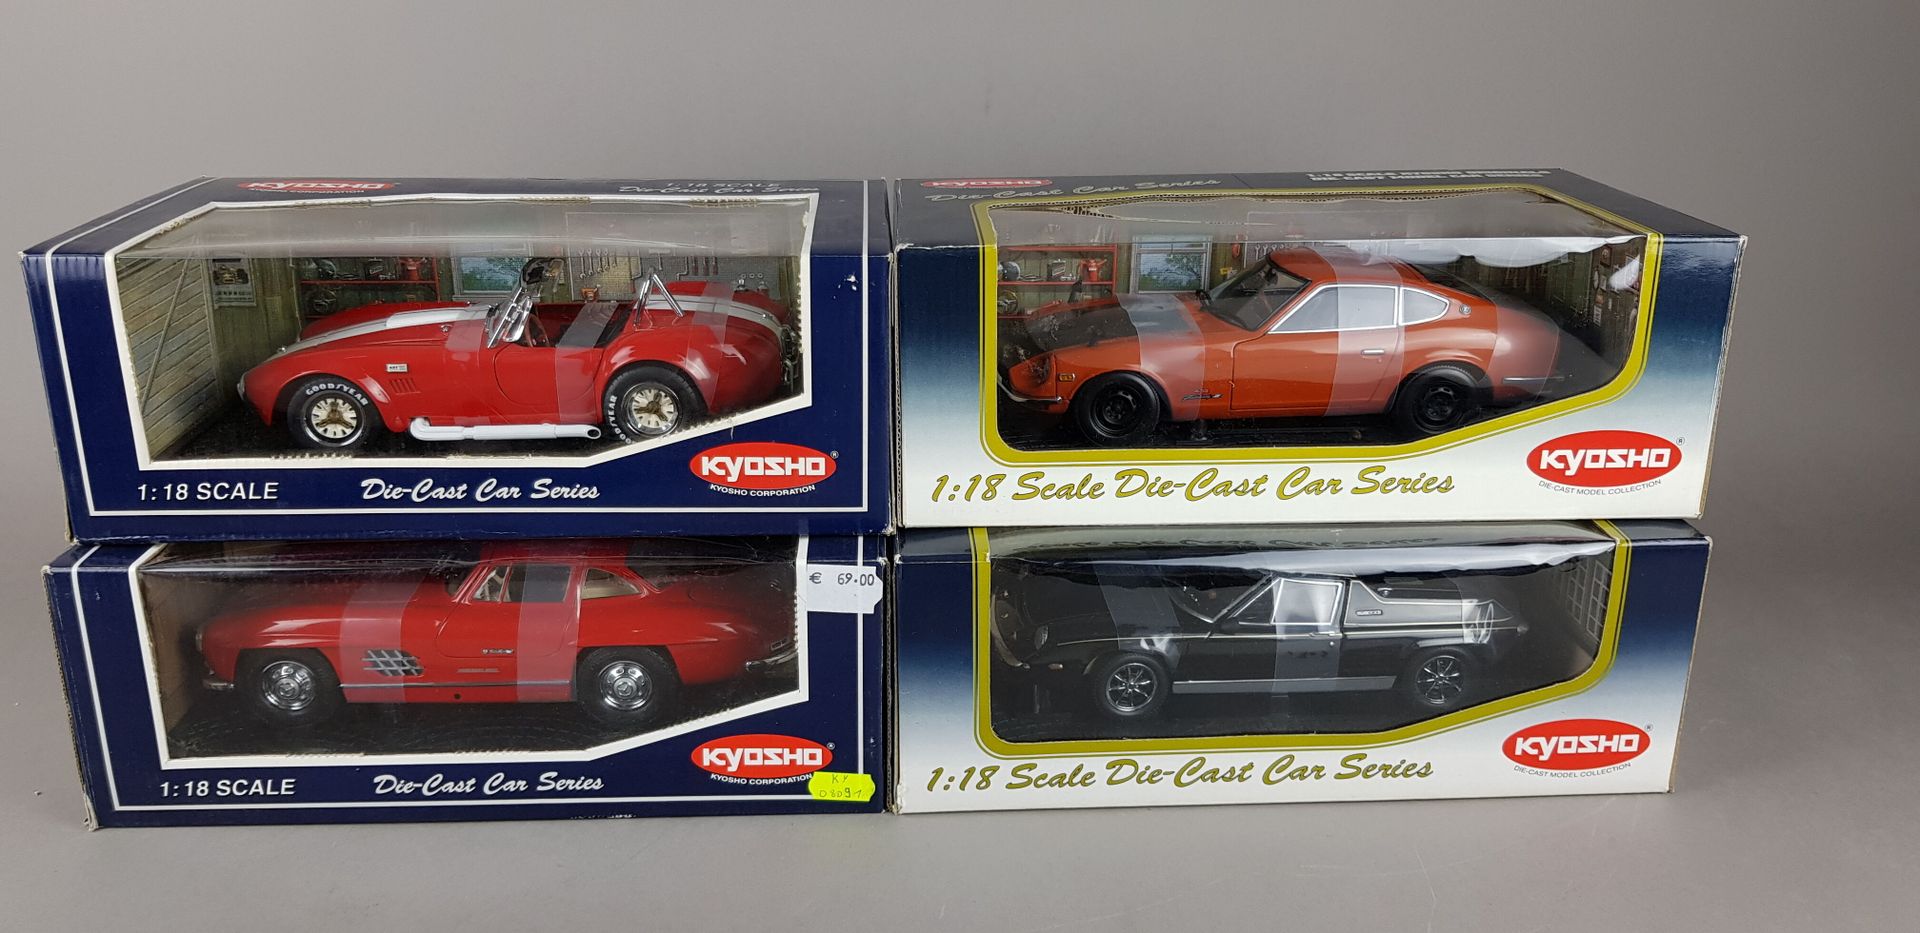 Null KYOSHO - QUATRE VOITURES échelle 1/18 :

1x Lotus Europa Special

1x Shelby&hellip;